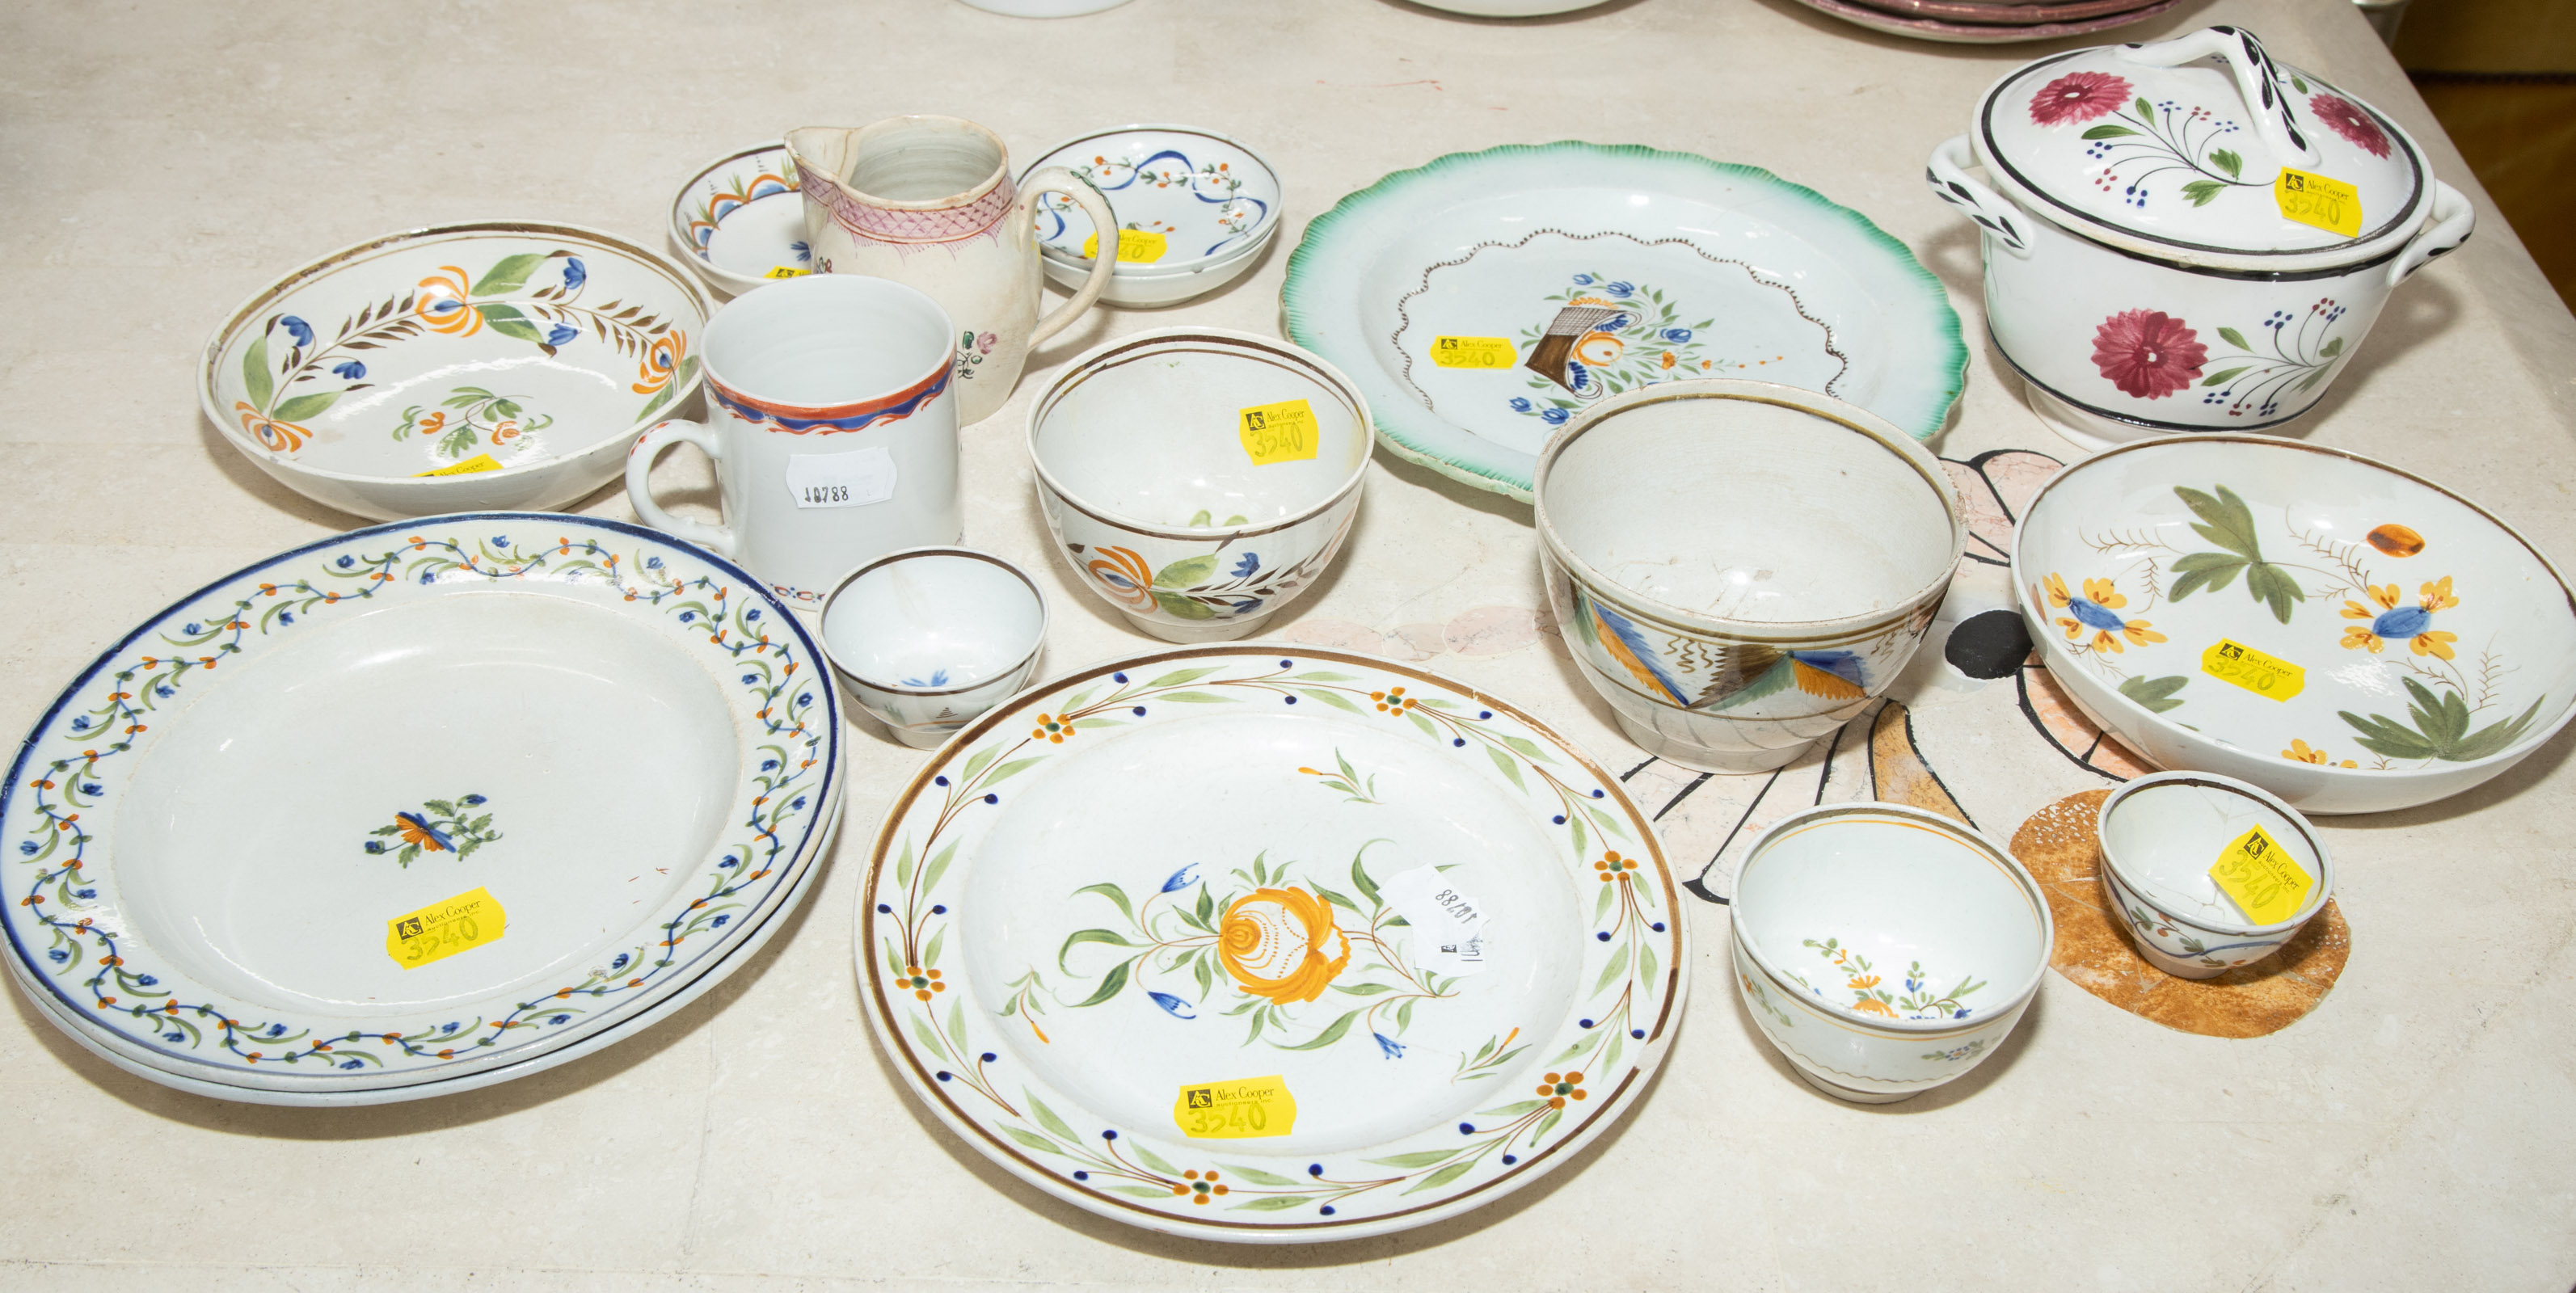 COLLECTION OF STAFFORDSHIRE PEARLWARE